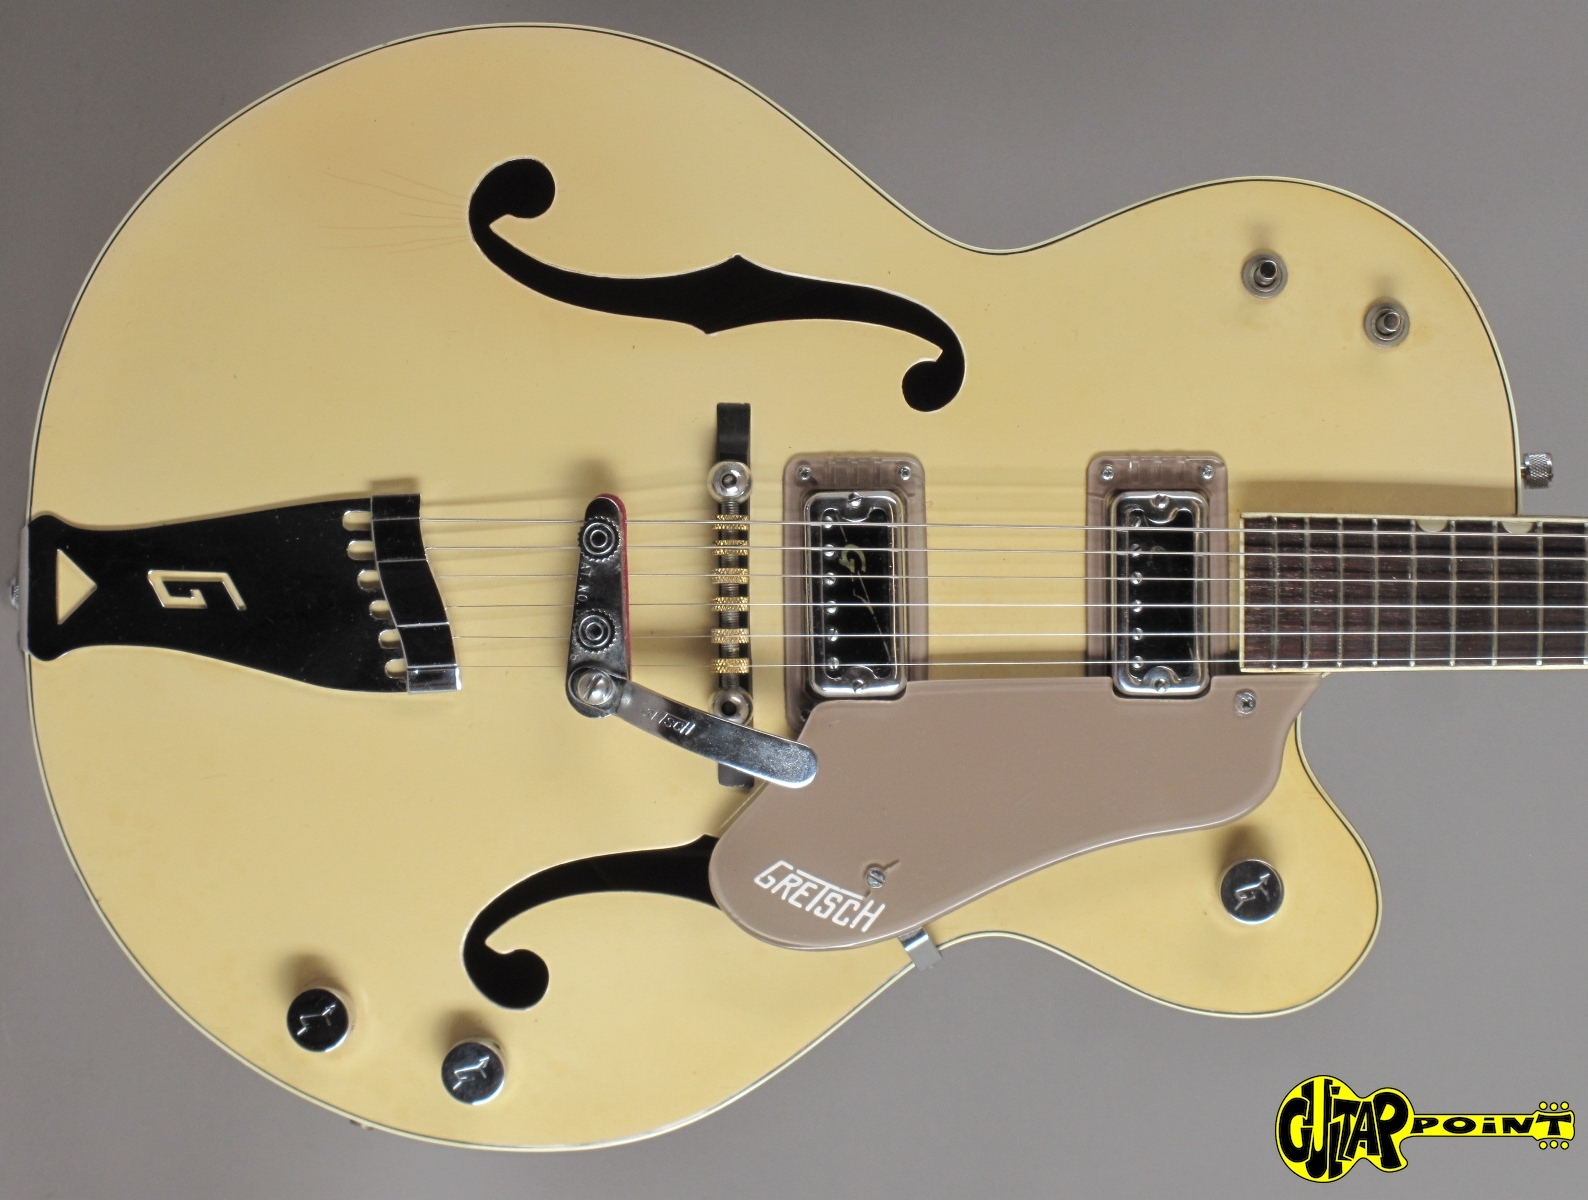 Gretsch 6118 Double Anniversary 1964 Two Tone Tan Guitar For Sale 